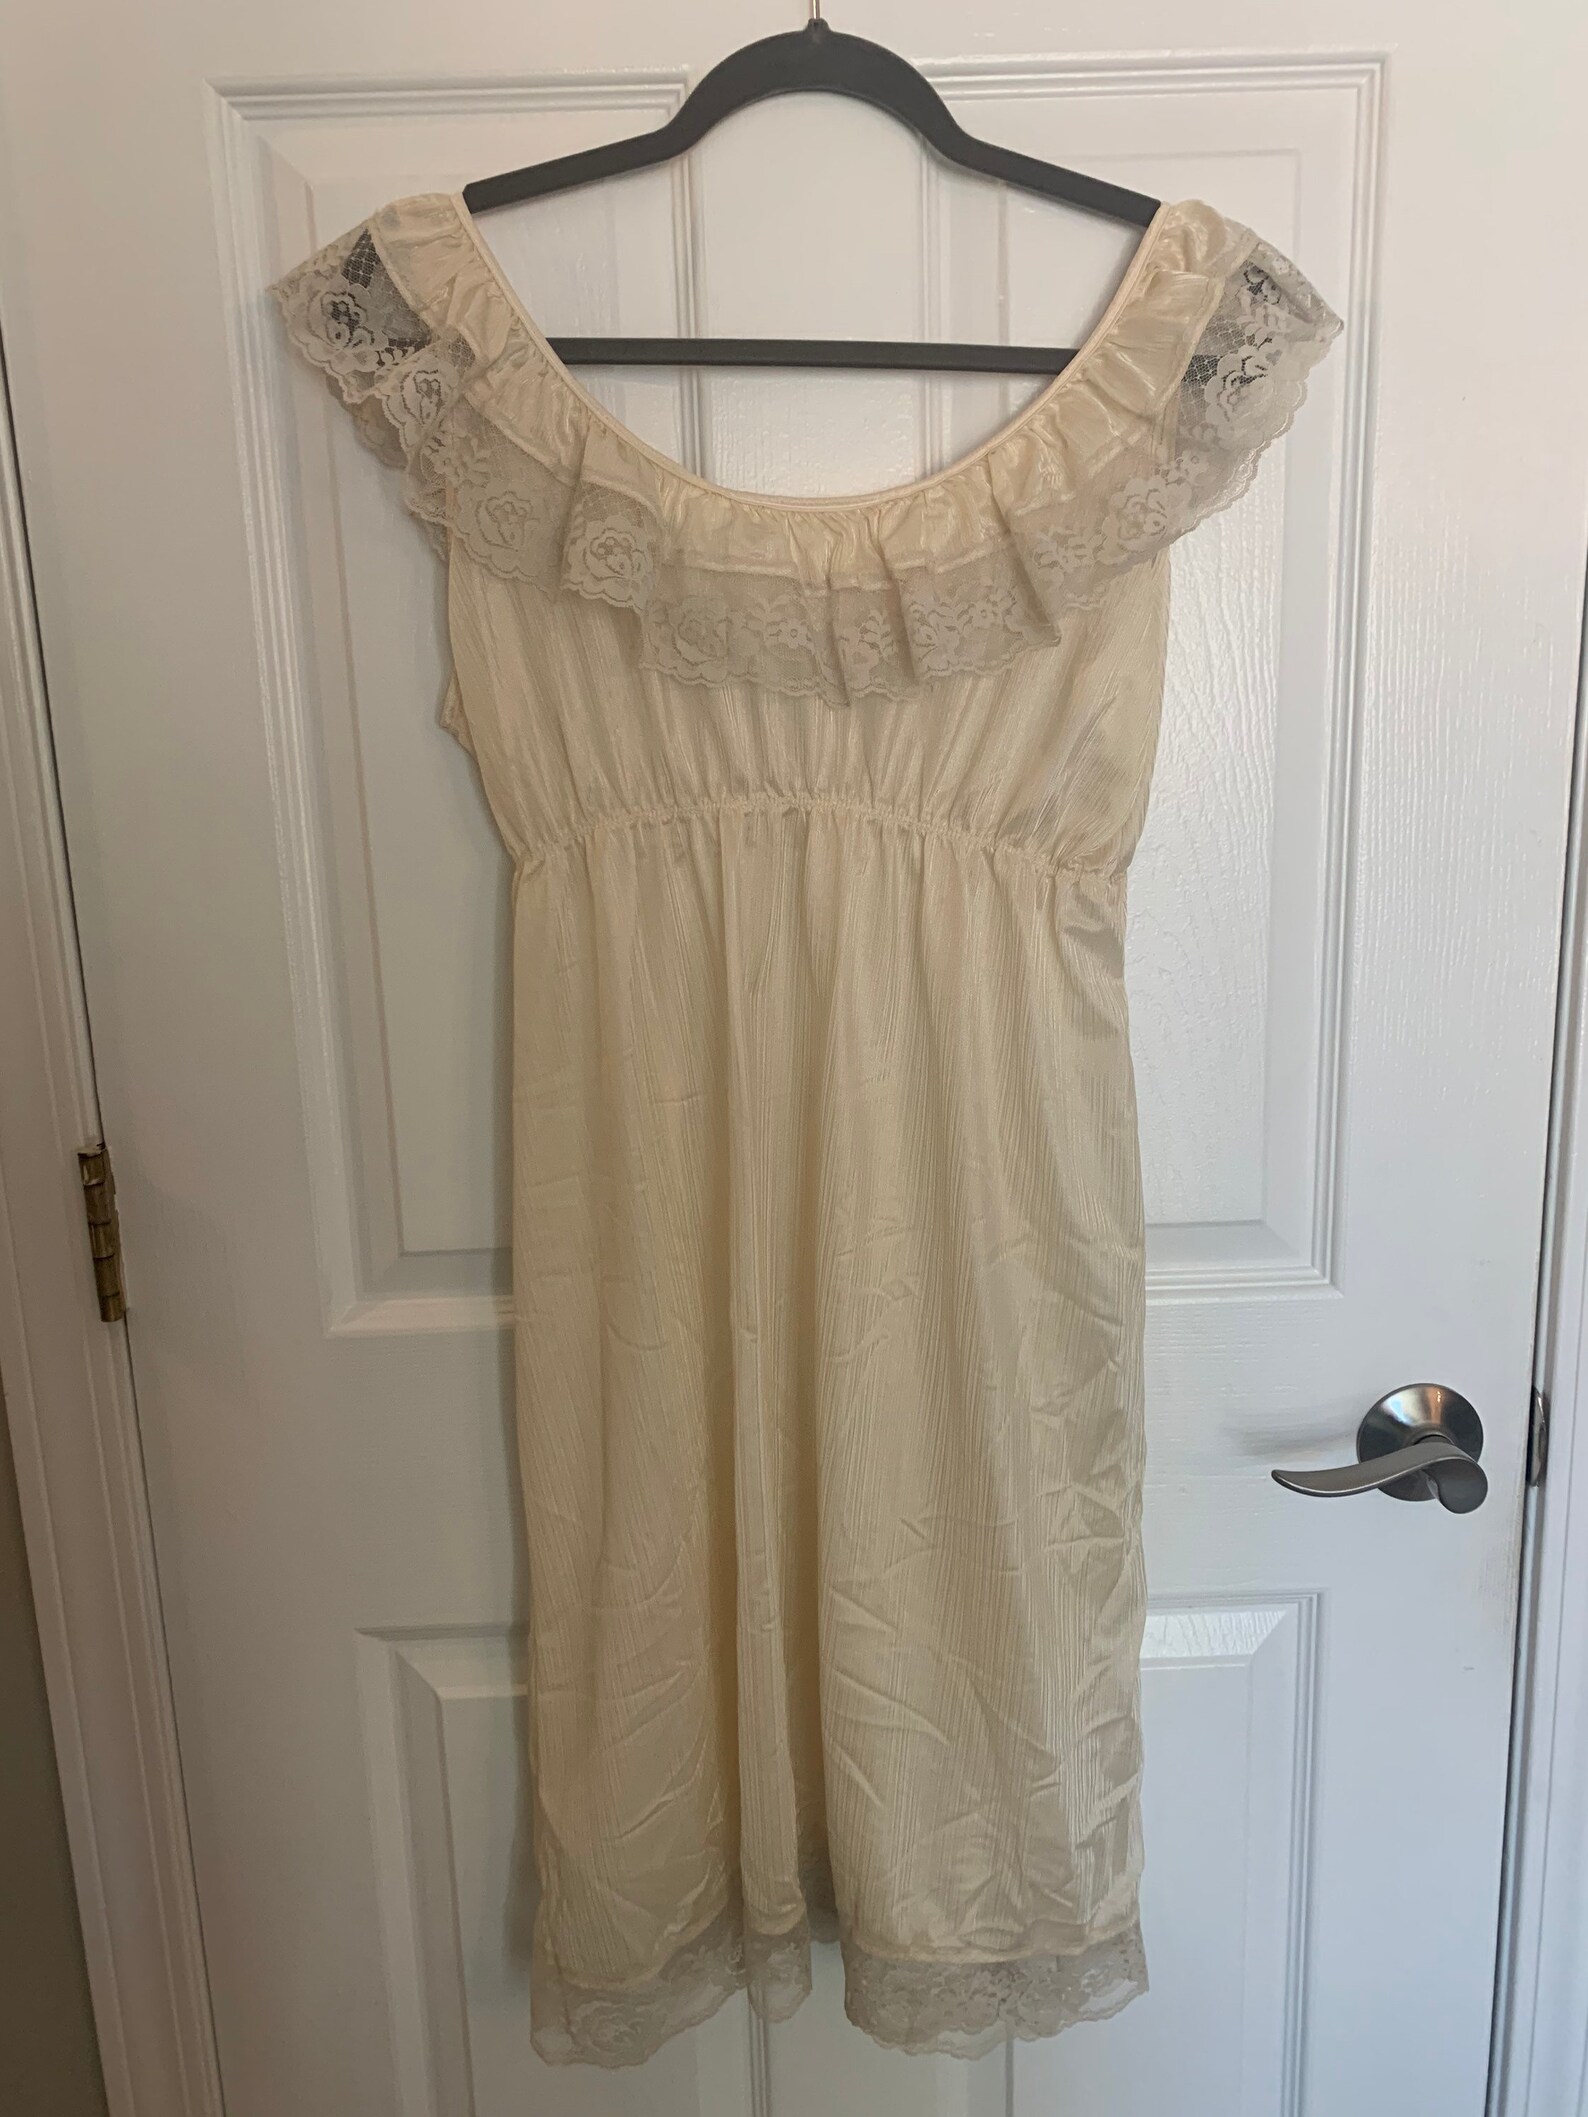 Vintage Off White Lace Trimmed Nightgown Empire Elastic